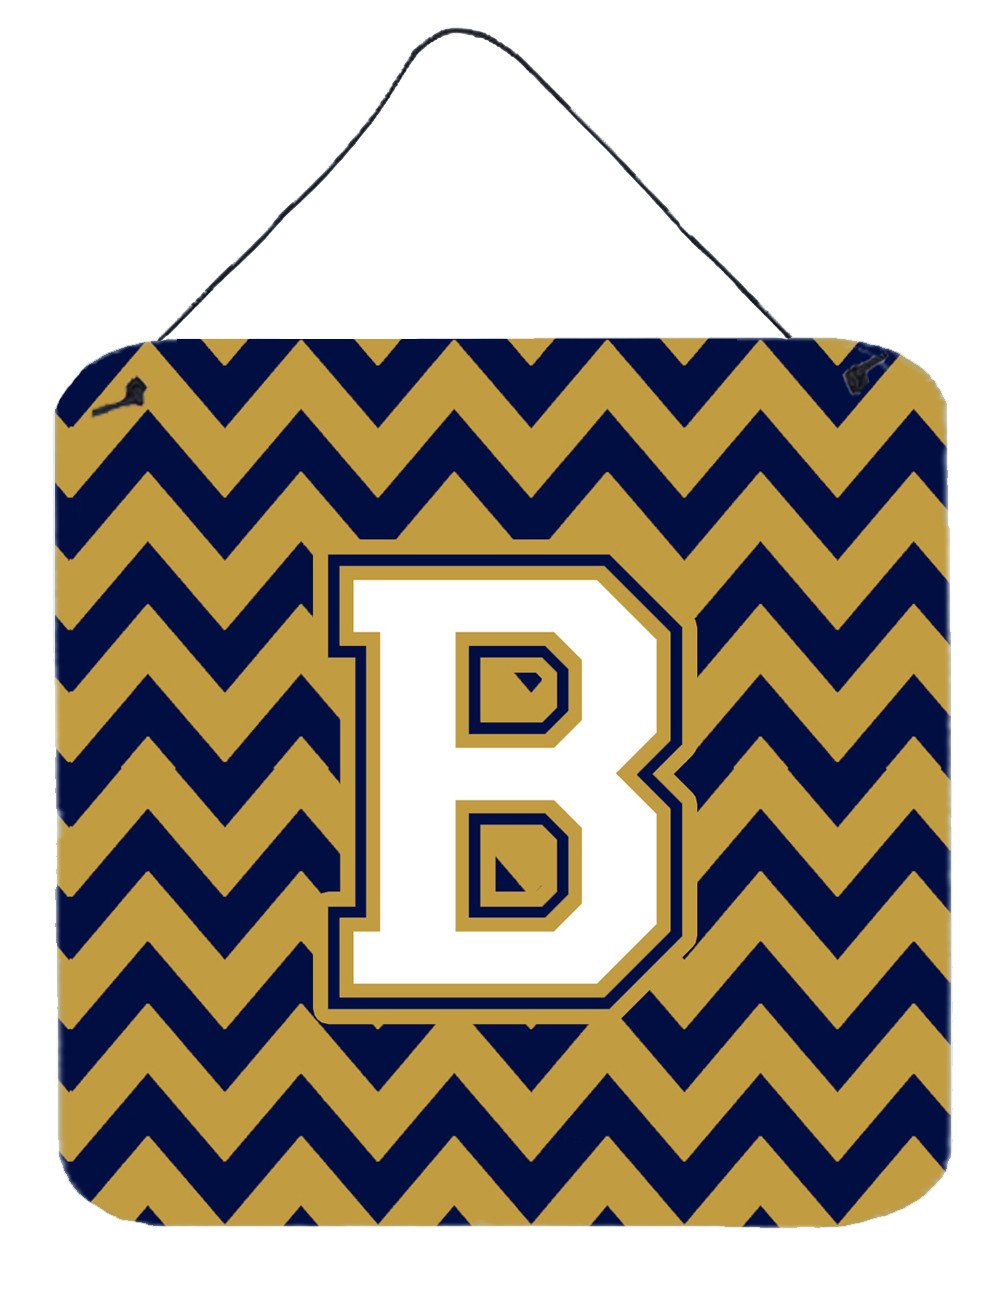 Letter B Chevron Navy Blue and Gold Wall or Door Hanging Prints CJ1057-BDS66 by Caroline's Treasures